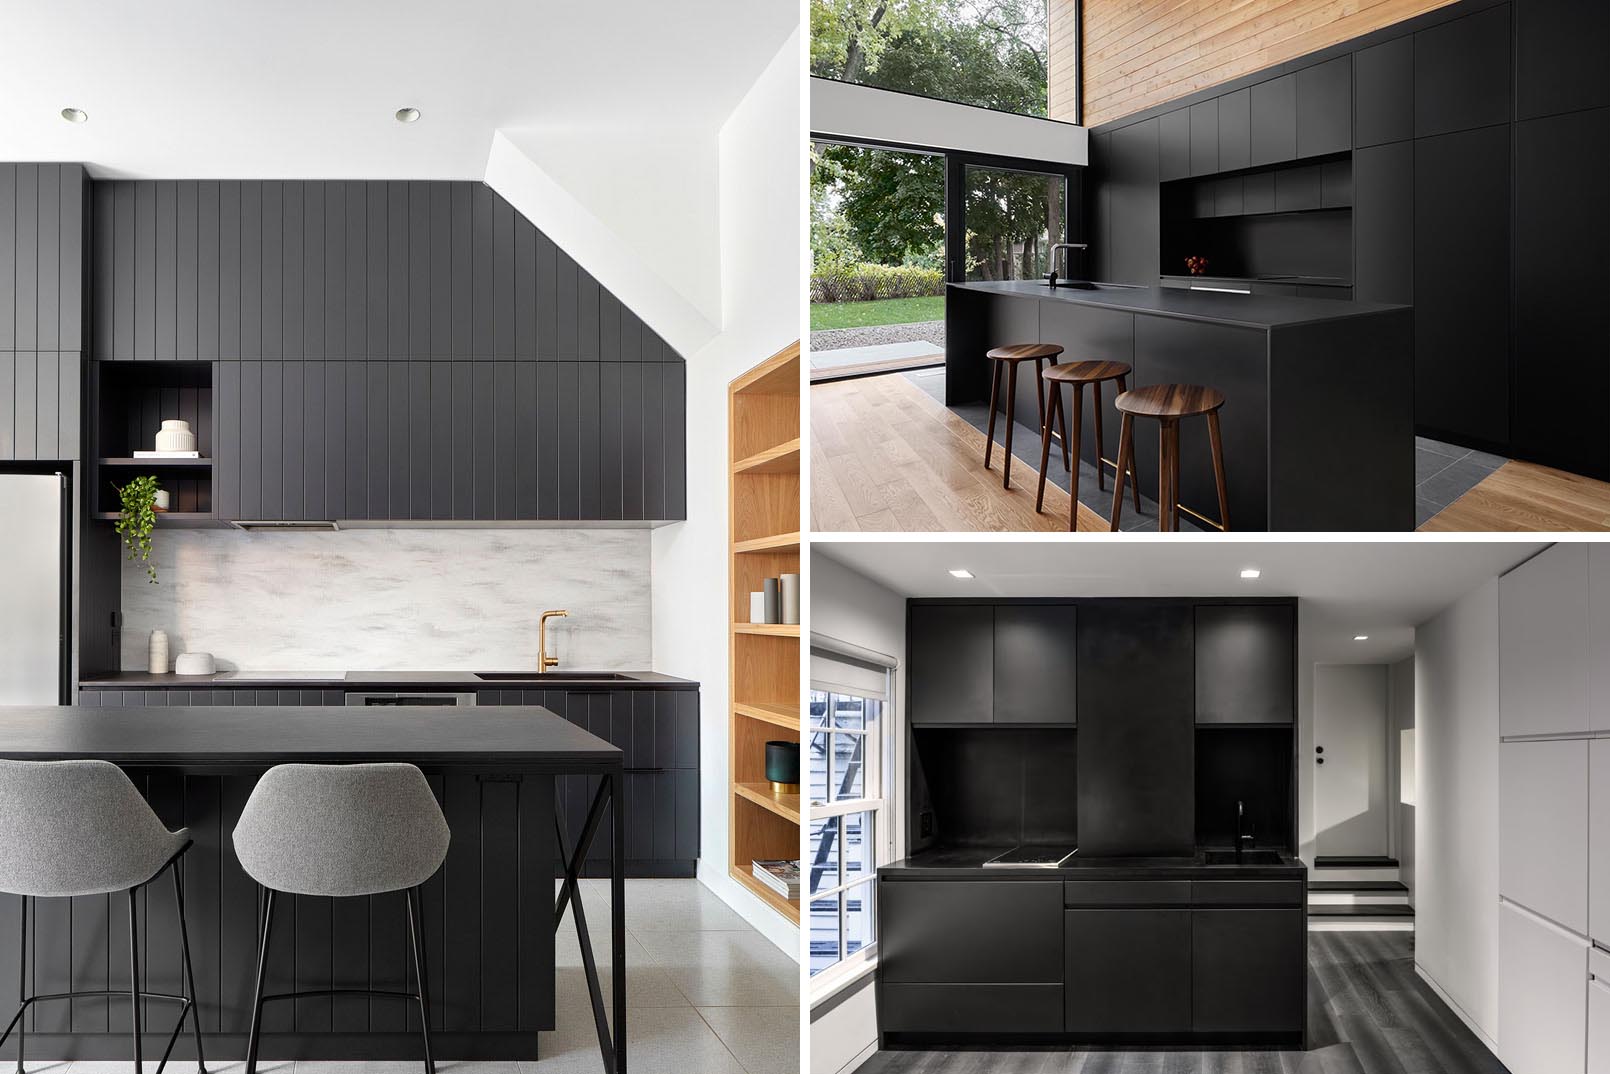 A collection of modern black kitchens.